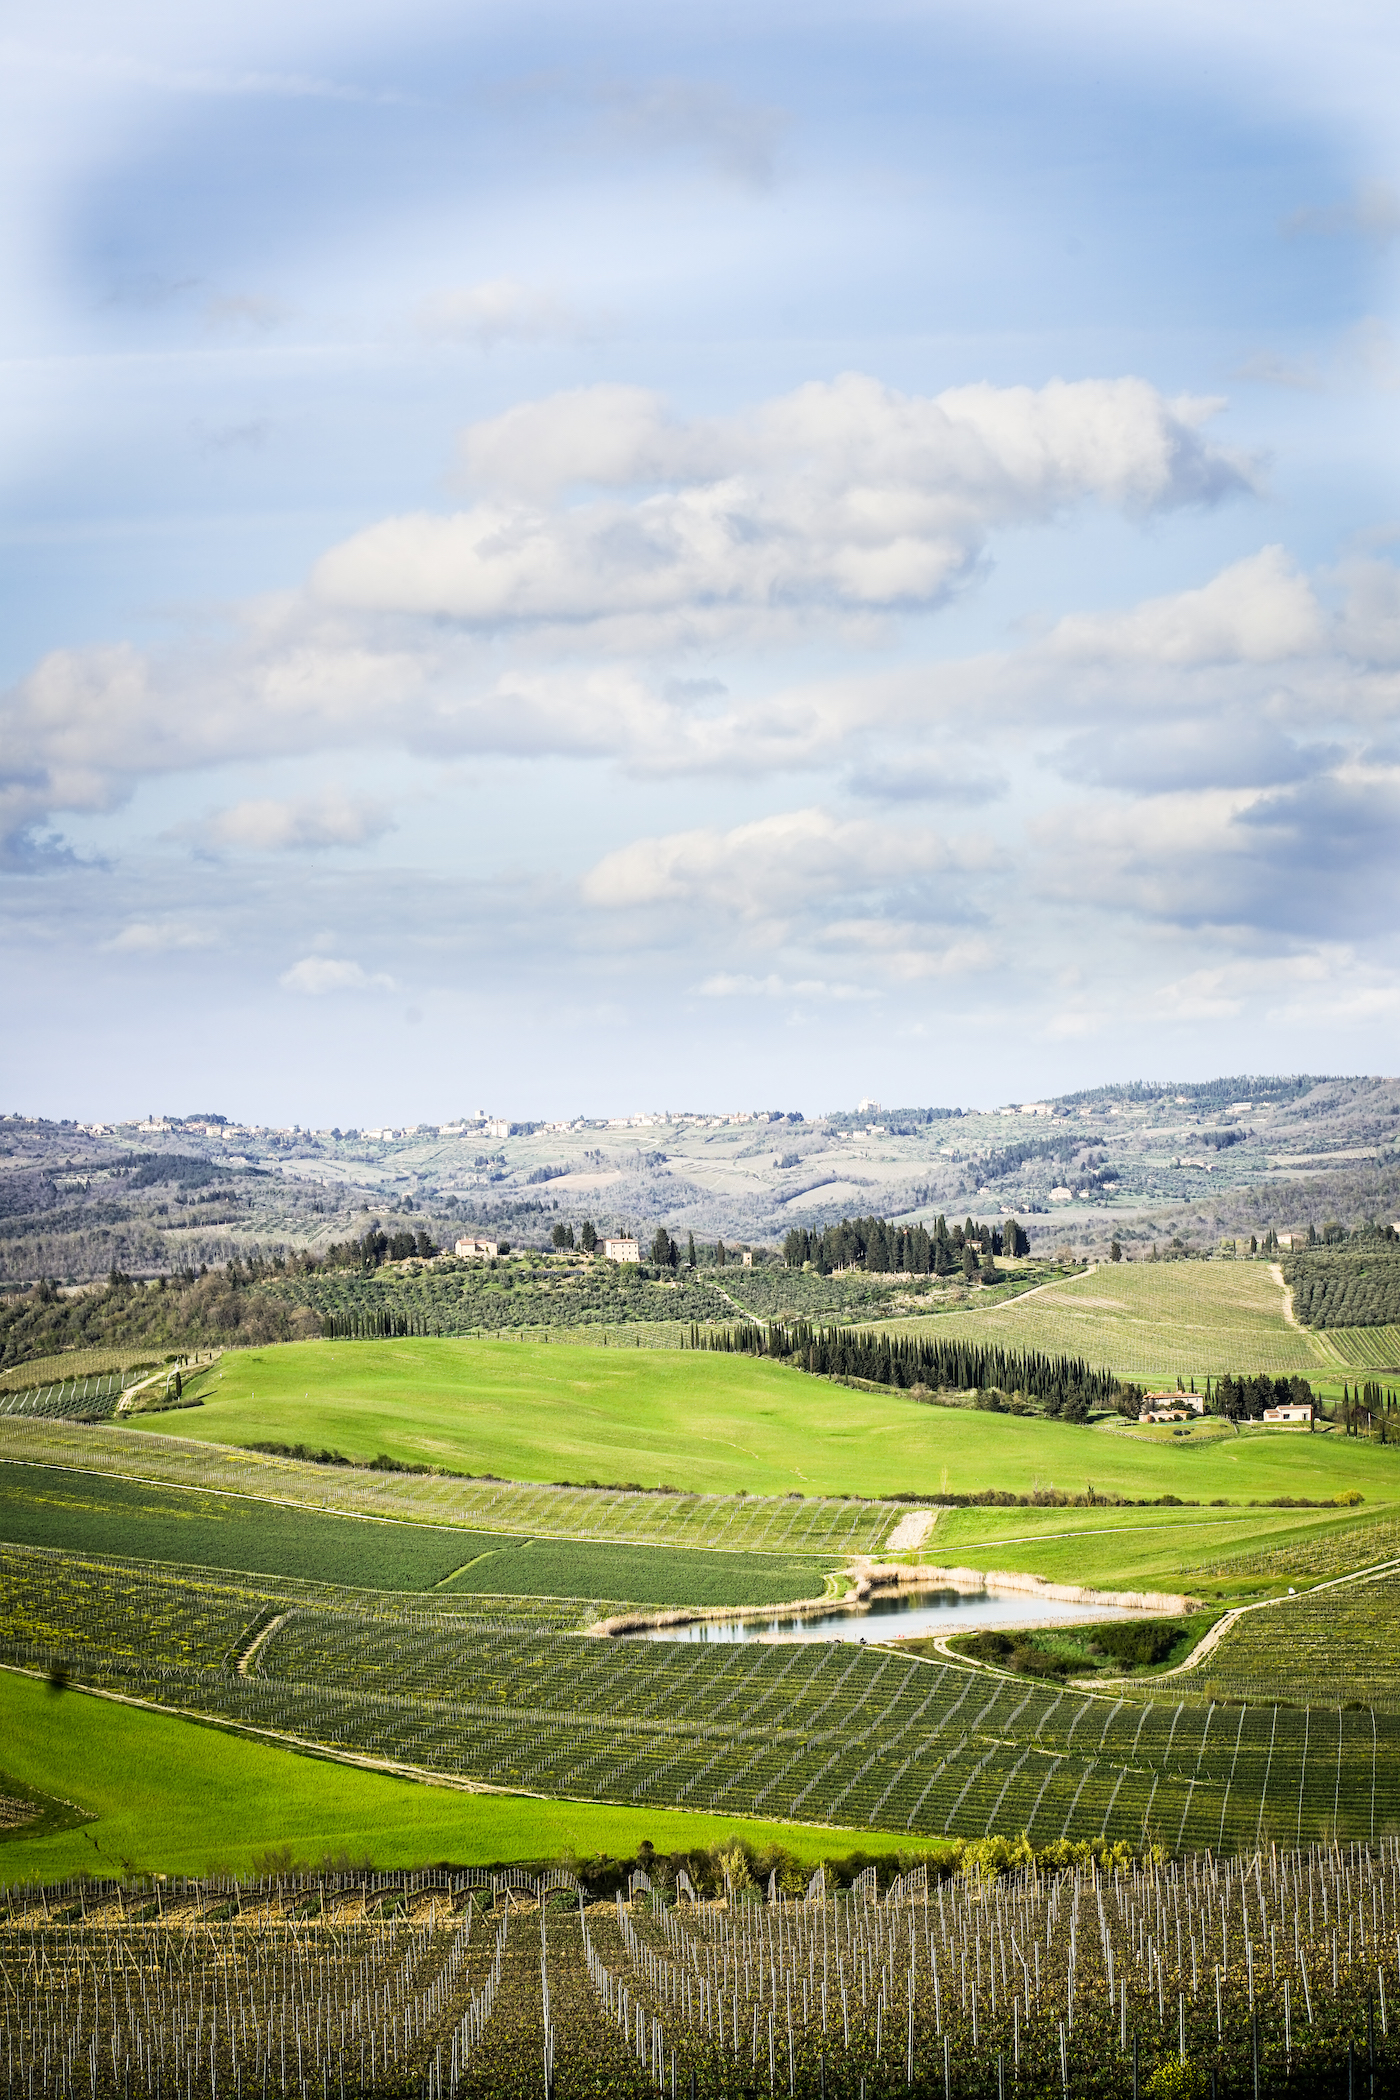 Vineyards in the foreground, bright green hills in the distance, and blue sky with puffy clouds